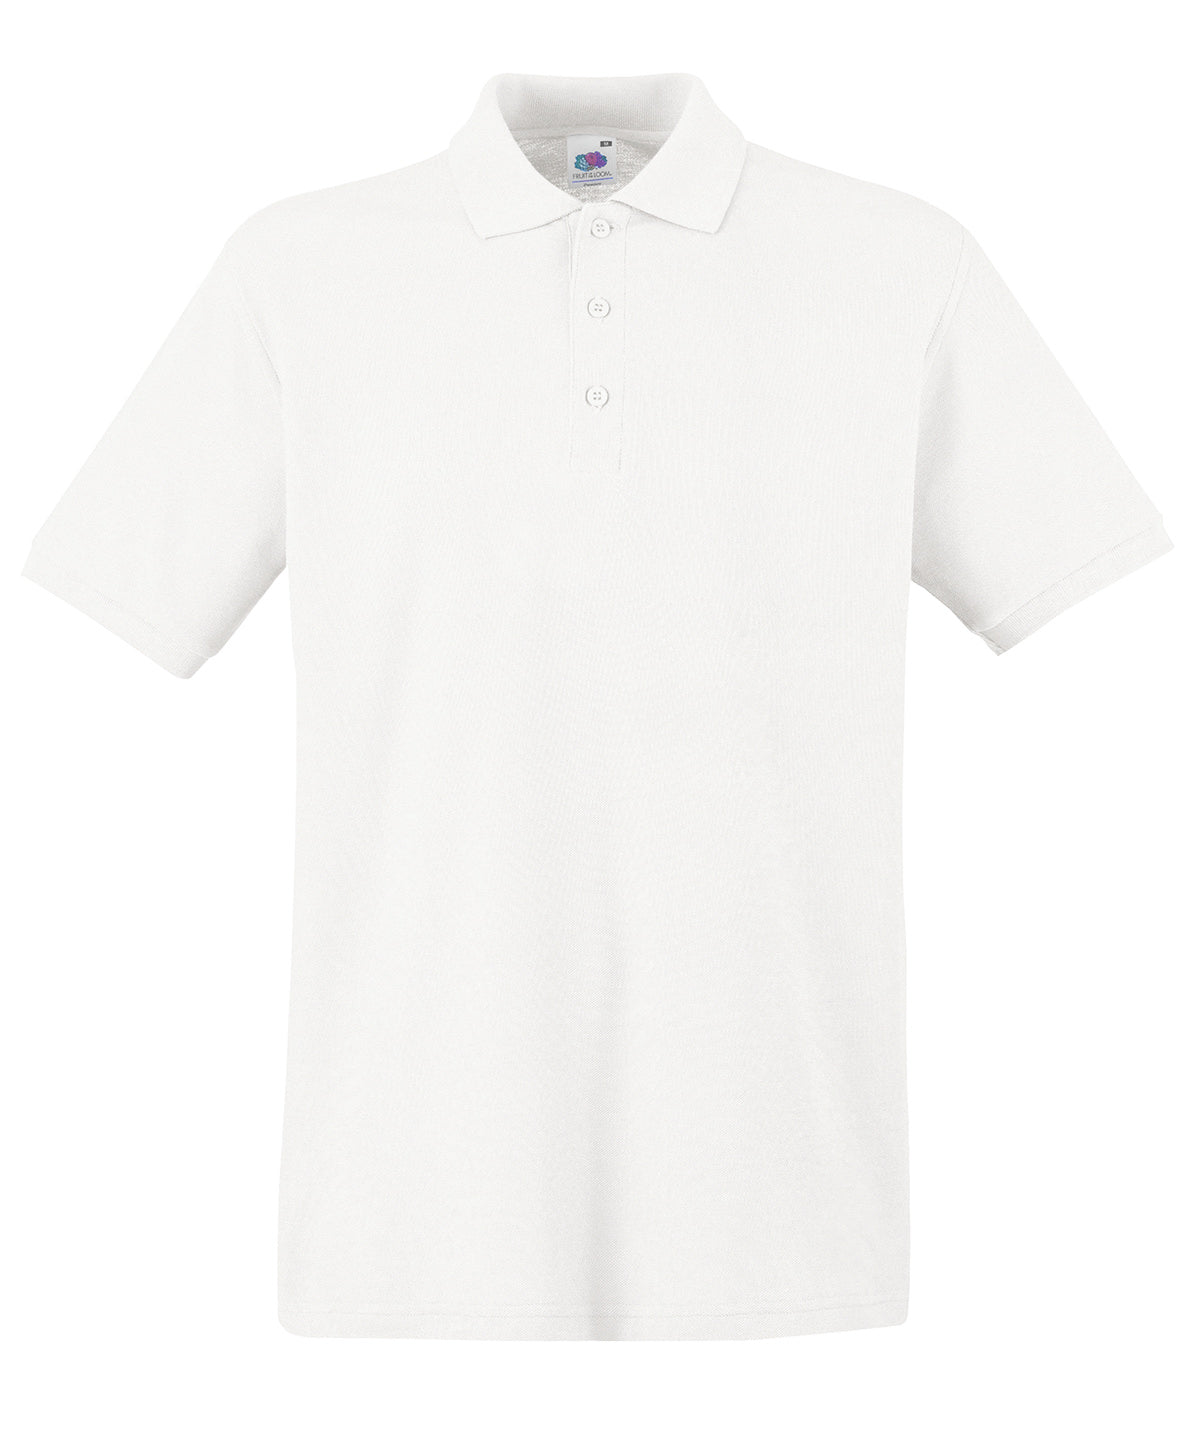 White - Premium polo Polos Fruit of the Loom 2022 Spring Edit, Fruit of the Loom Polos, Must Haves, New Colours For 2022, Plus Sizes, Polos & Casual, Raladeal - Recently Added Schoolwear Centres